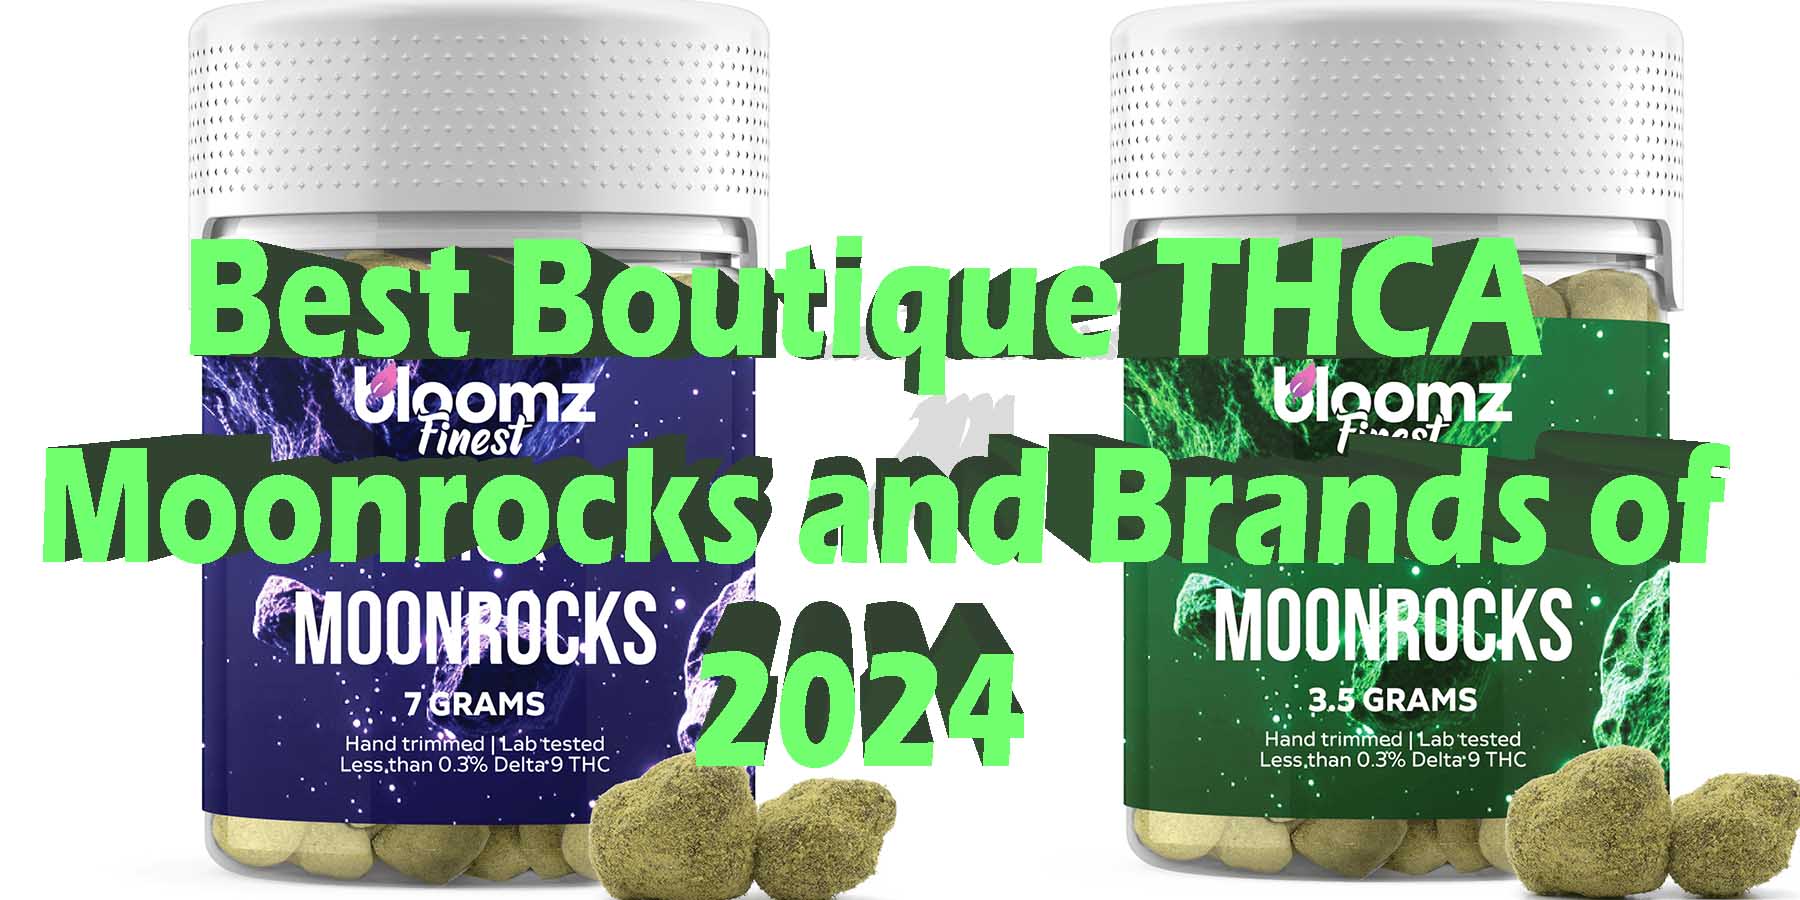 Best Boutique THCA Moonrocks and Brands of 2024 WhereToGet HowToGetNearMe BestPlace LowestPrice Coupon Discount For Smoking Best High Smoke Shop Online Near Me Strongest Binoid